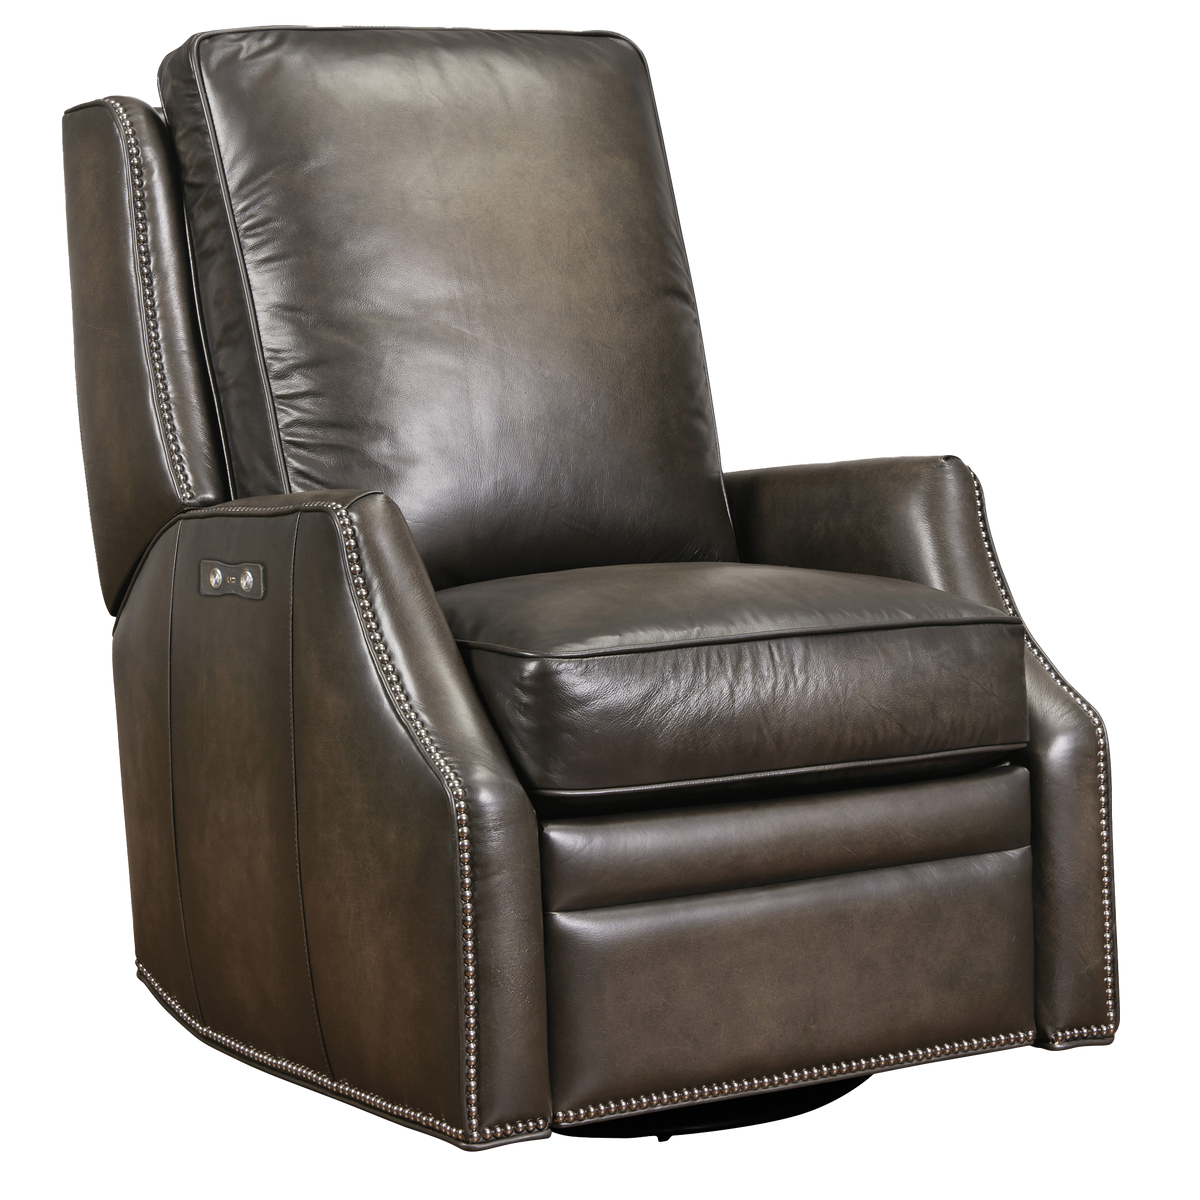 Elicce Power Swivel Glider Recliner, Leather